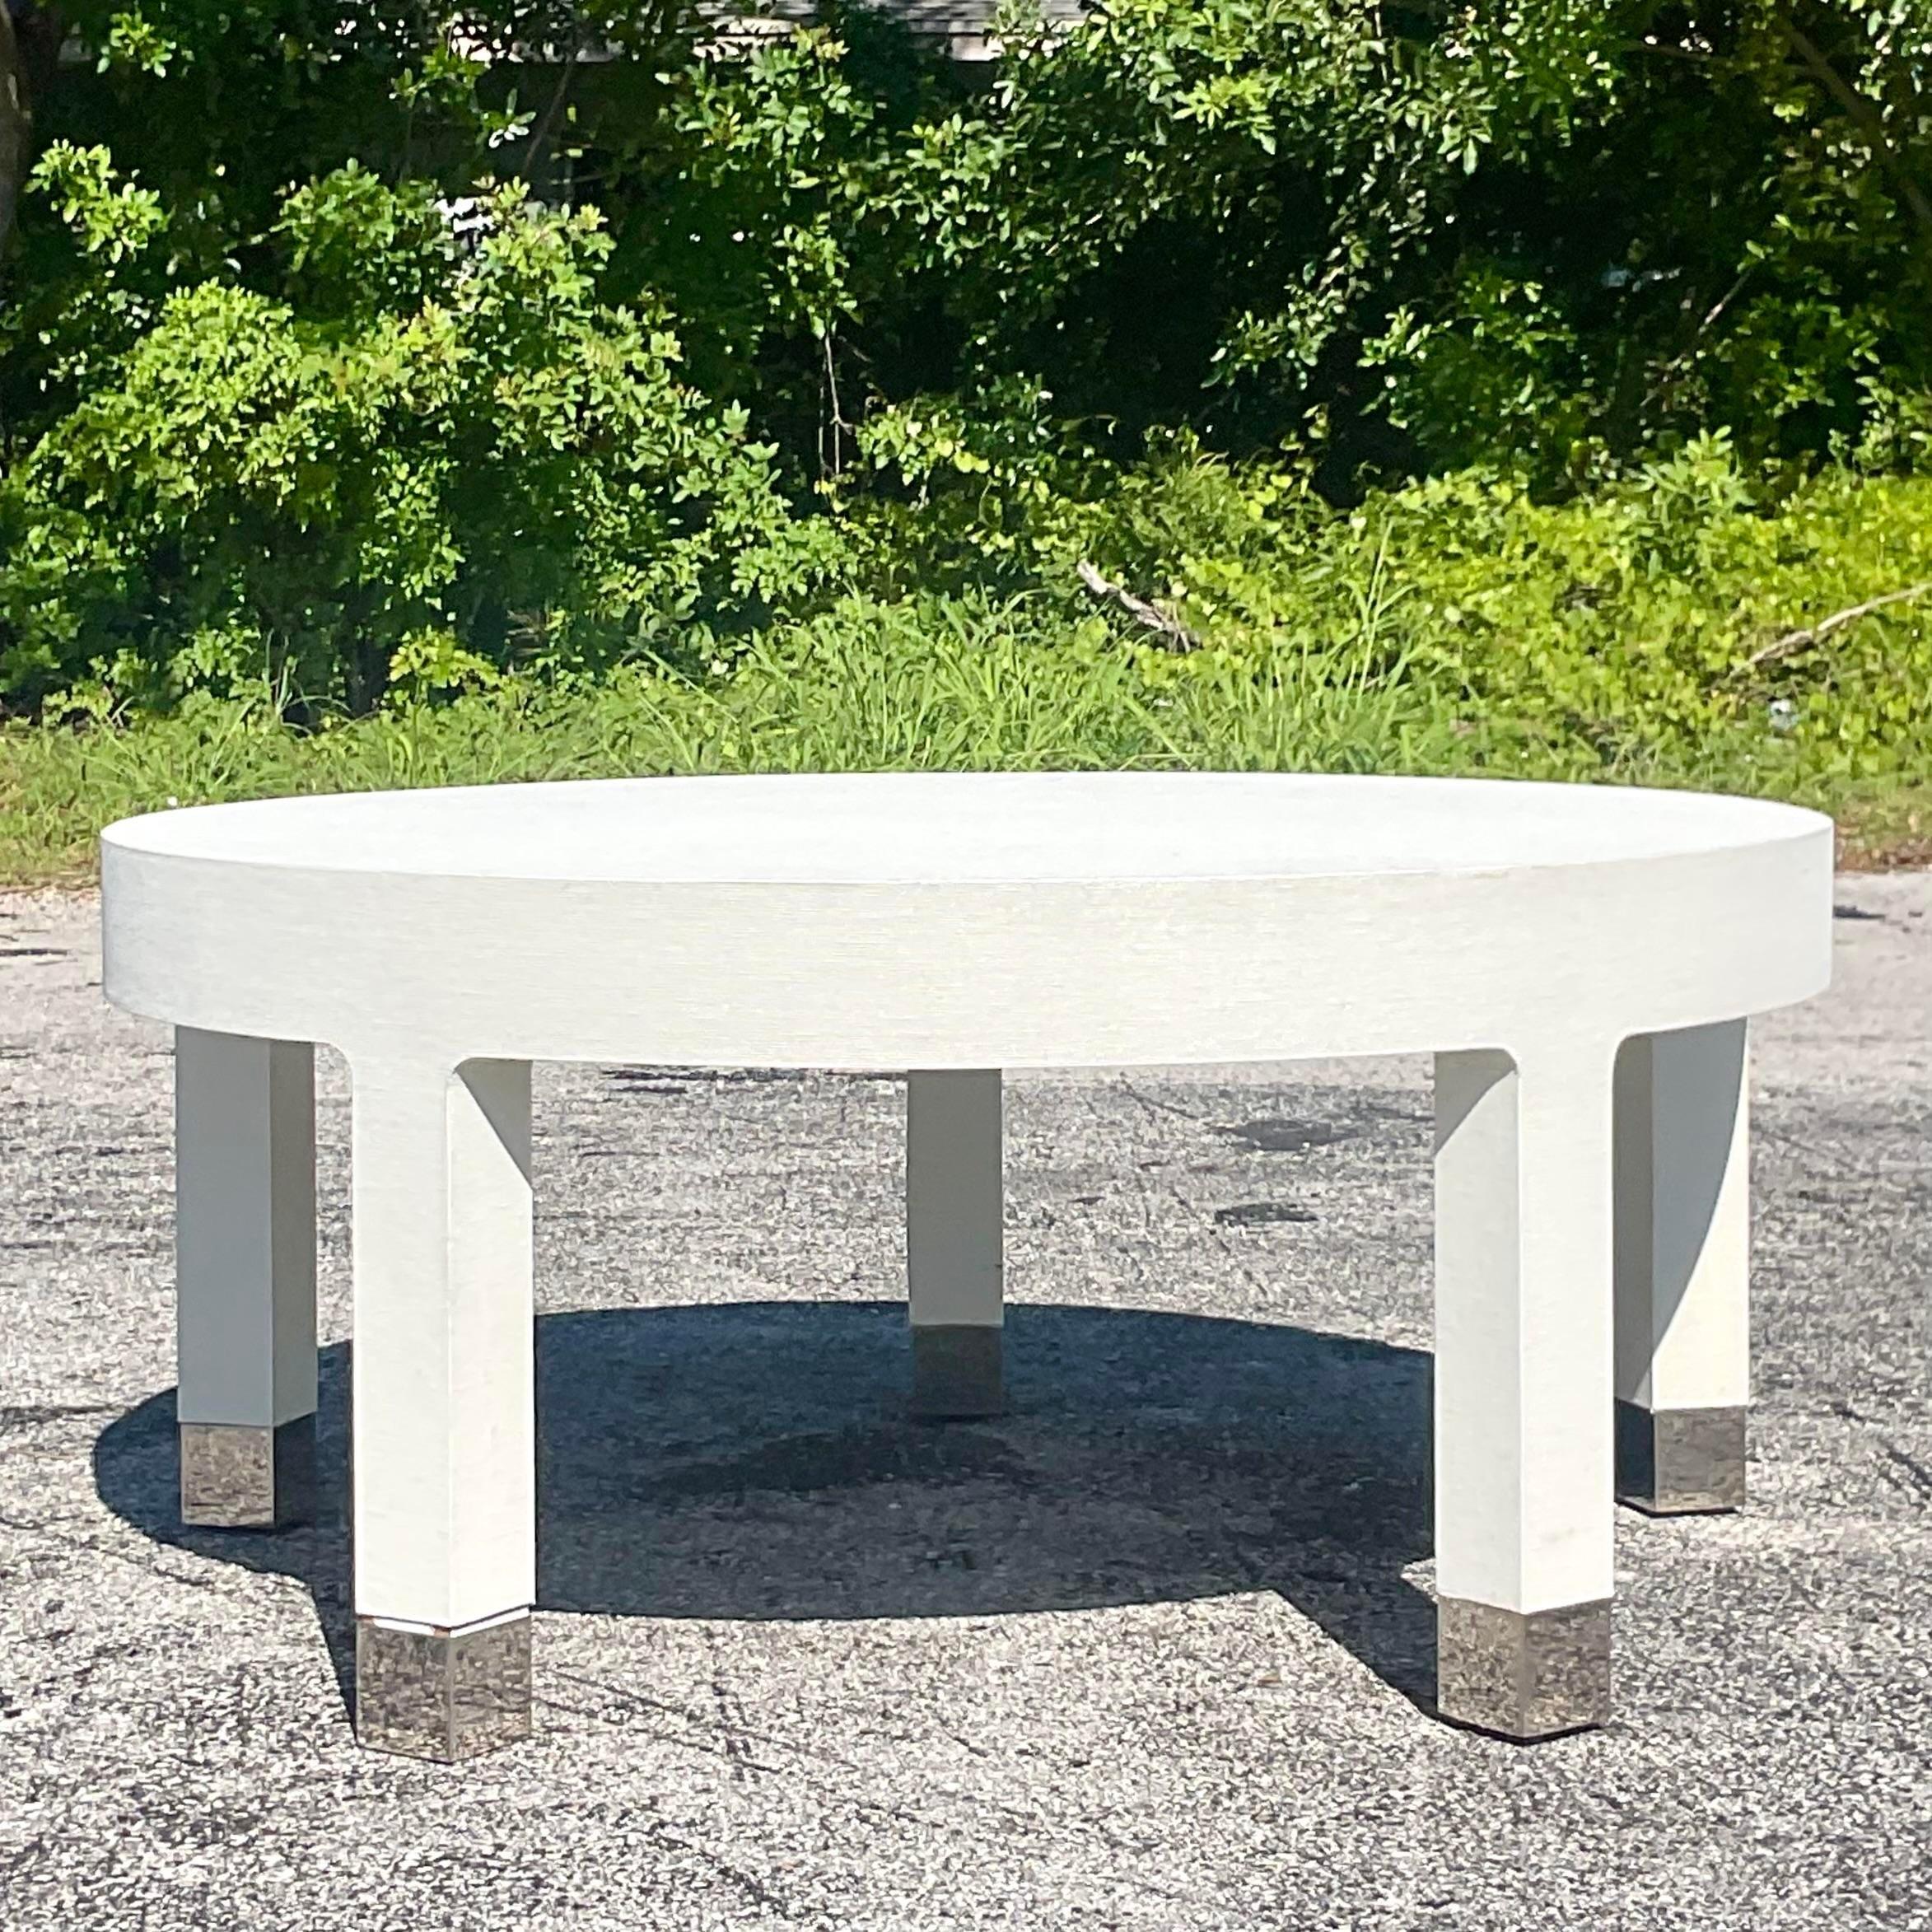 A fabulous vintage Custom built coffee table. A chic white Grasscloth finish with polished chrome leg caps. A real beauty and super well made. Acquired from a Palm Beach estate.